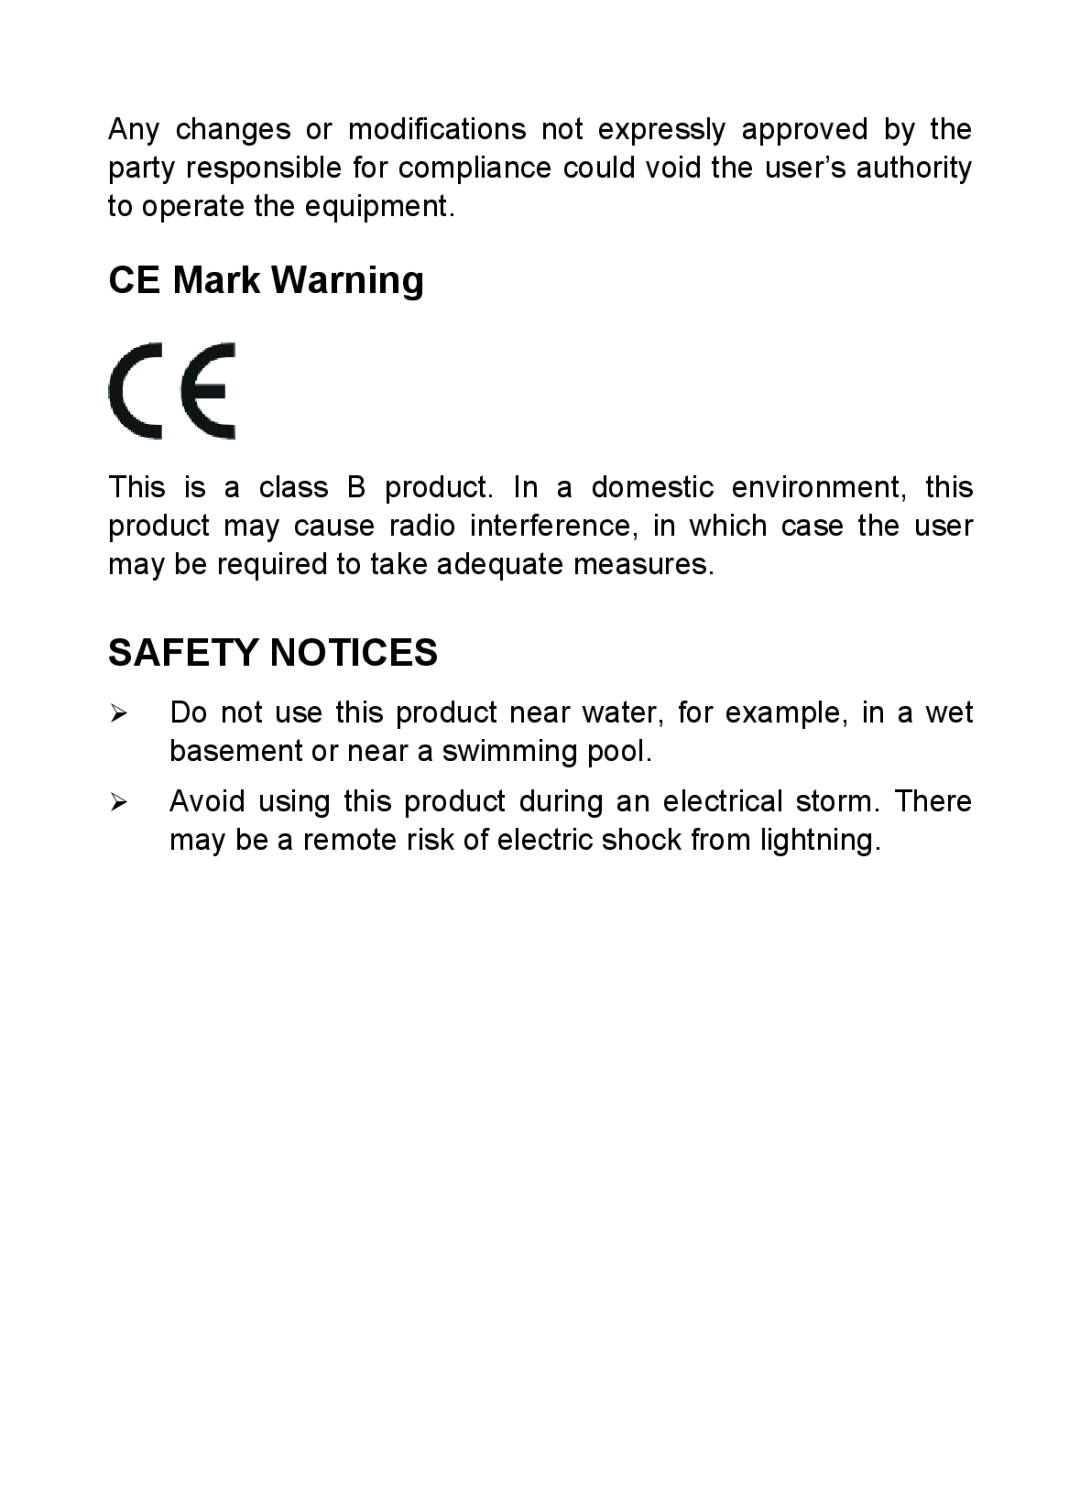 TP-Link TL-POE200 manual CE Mark Warning, Safety Notices 